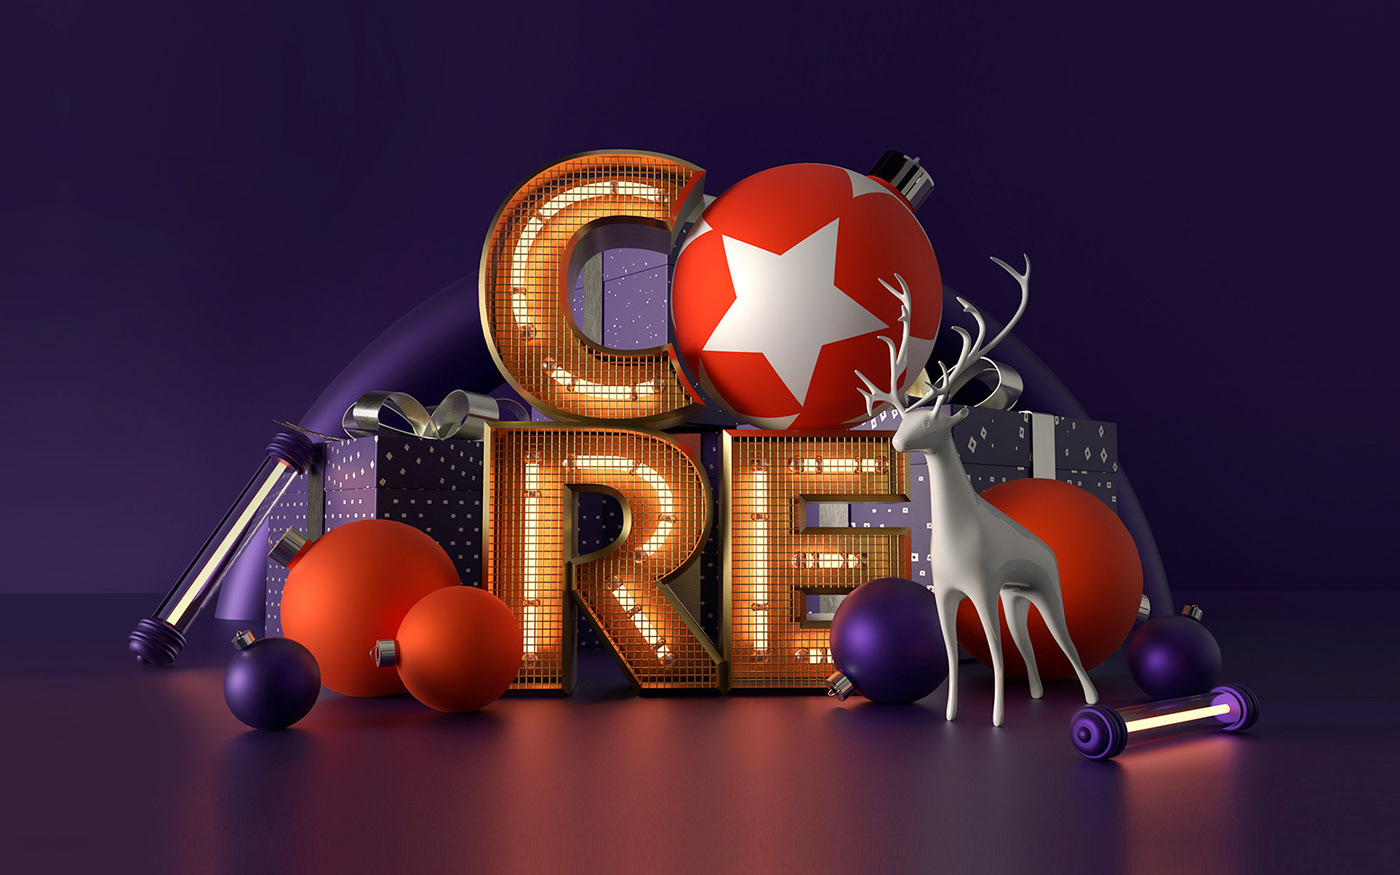 3D Type Deviantart Holiday key art wix campaign Email ads brand Interior